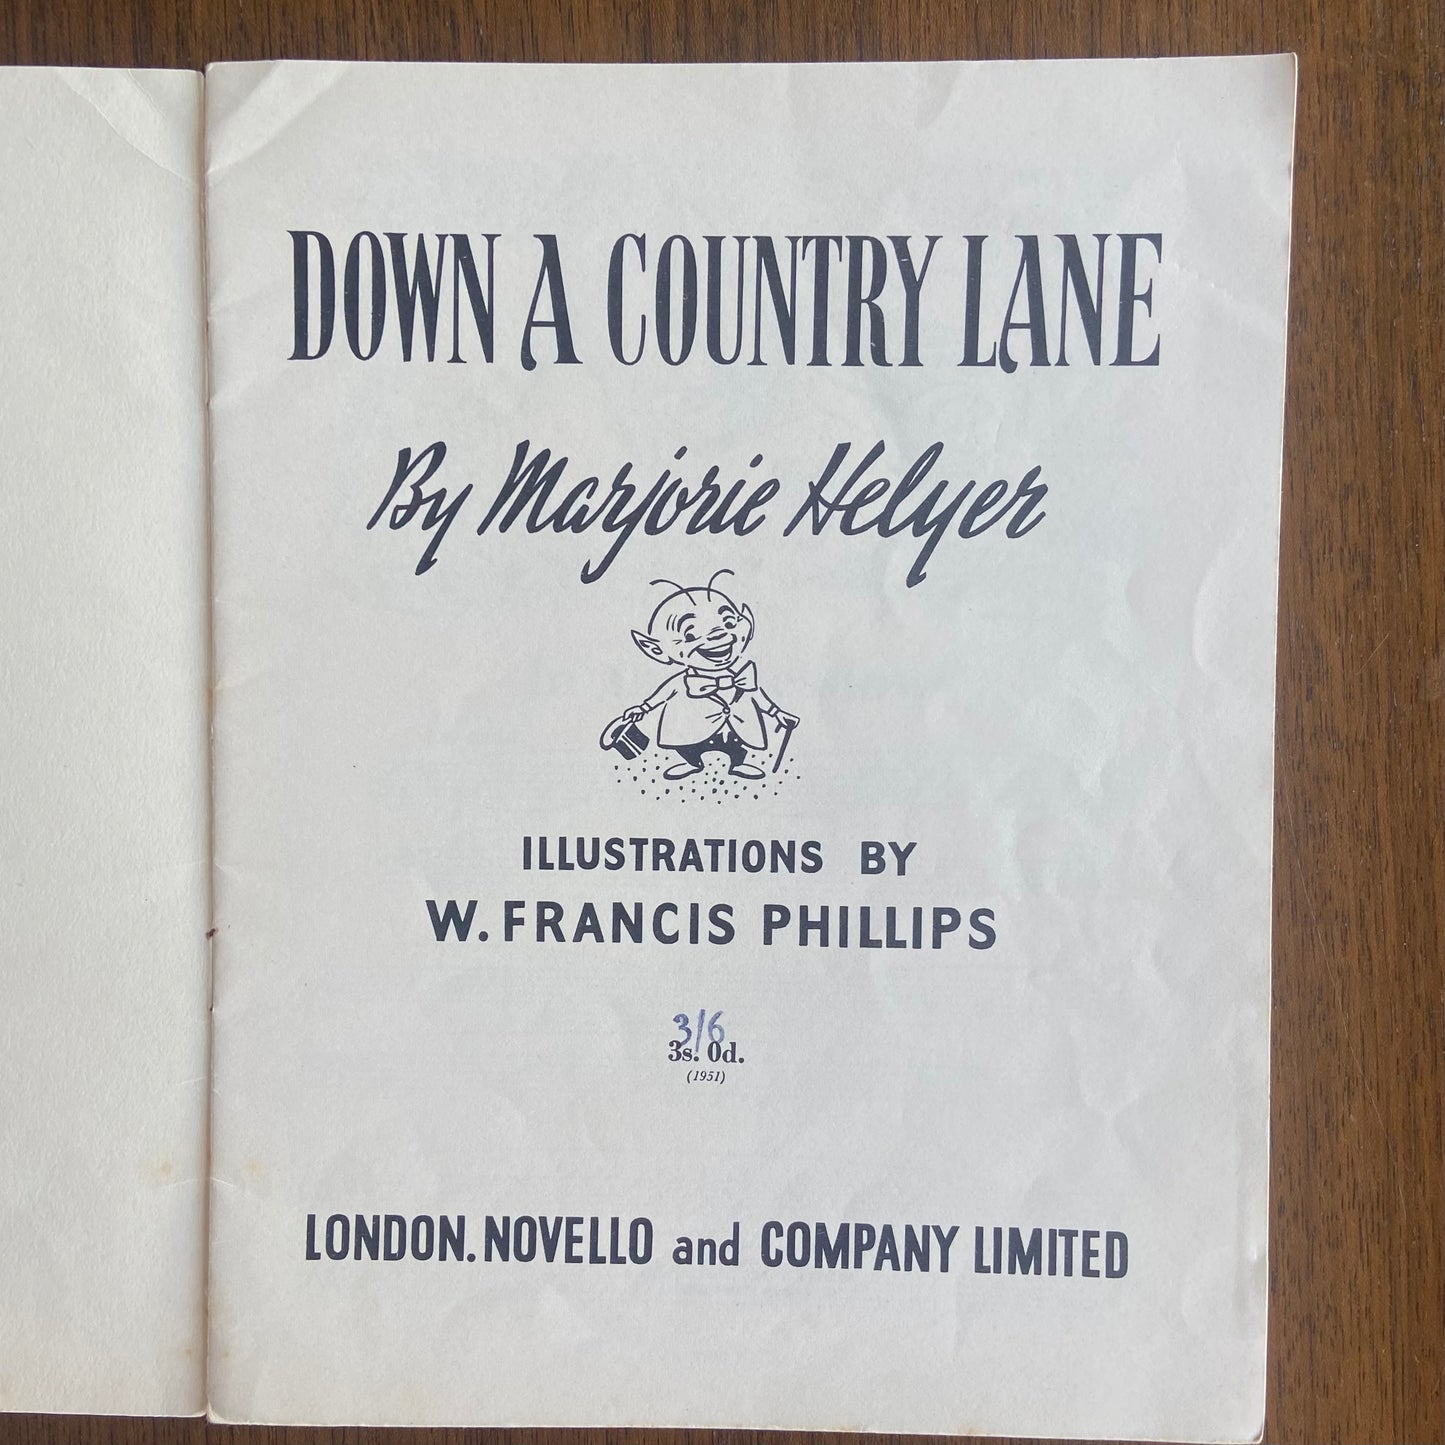 Down a Country Lane Sheet Music by Marjorie Heyler